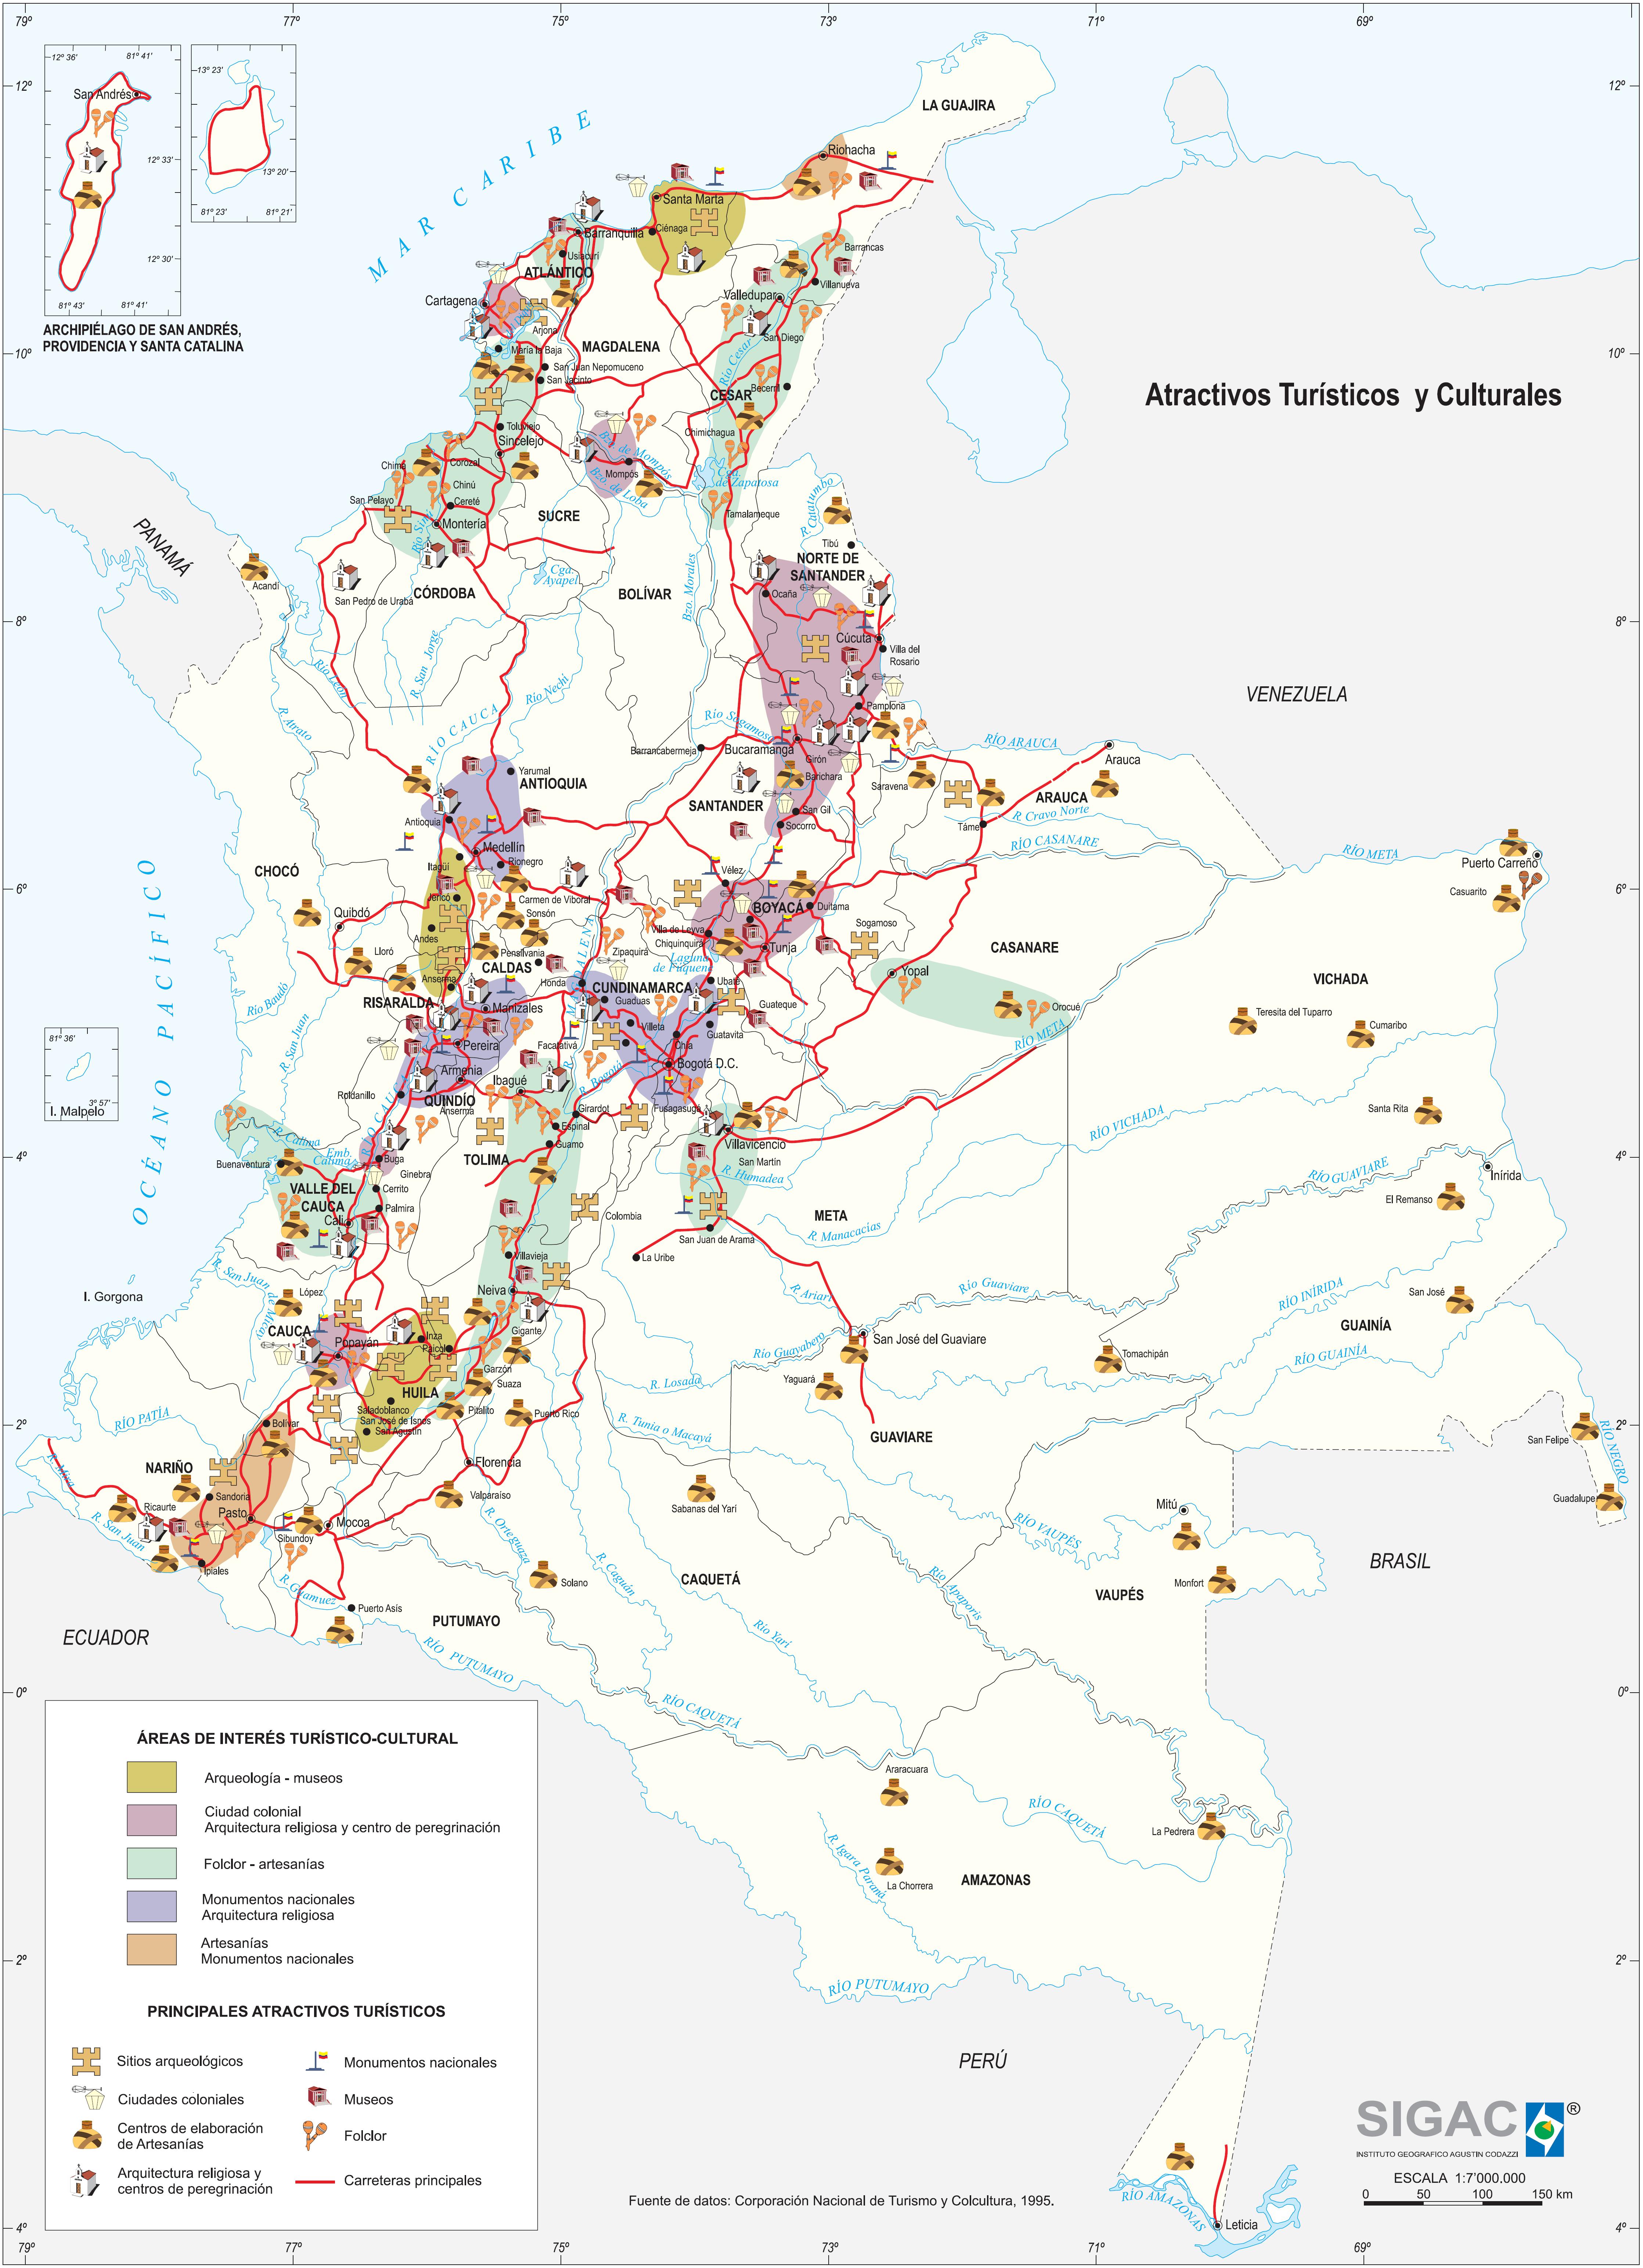 Colombia tourist map 1995 - Full size